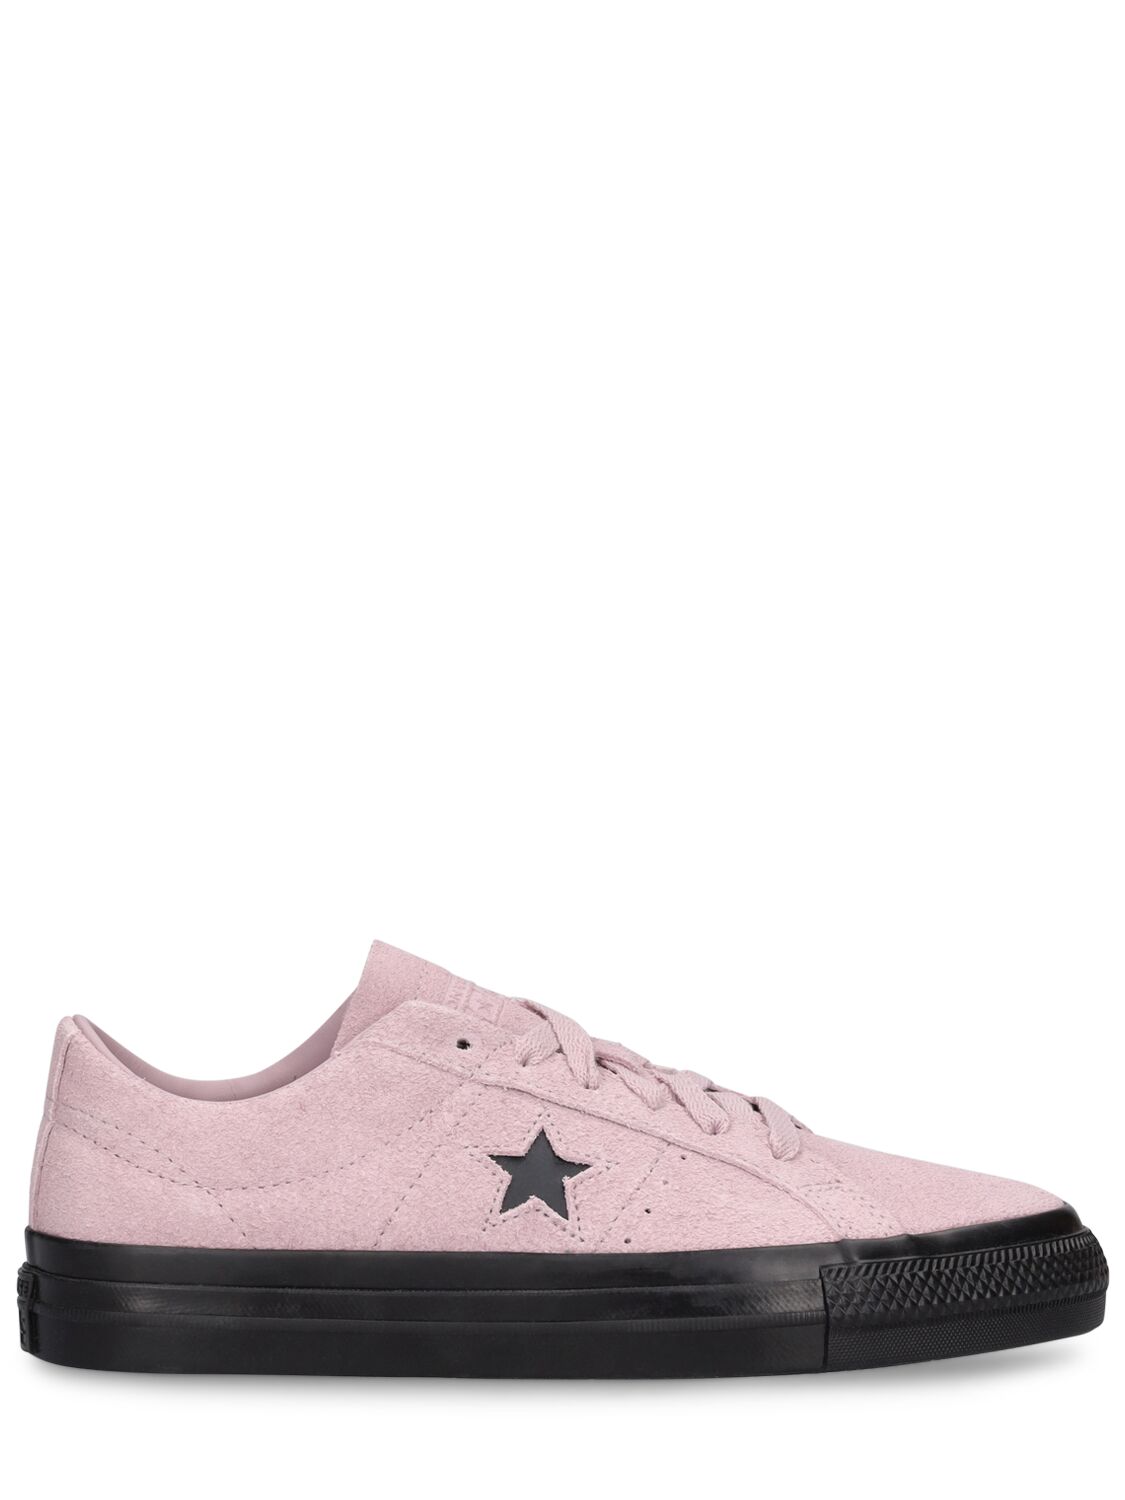 Image of One Star Pro Classic Sneakers